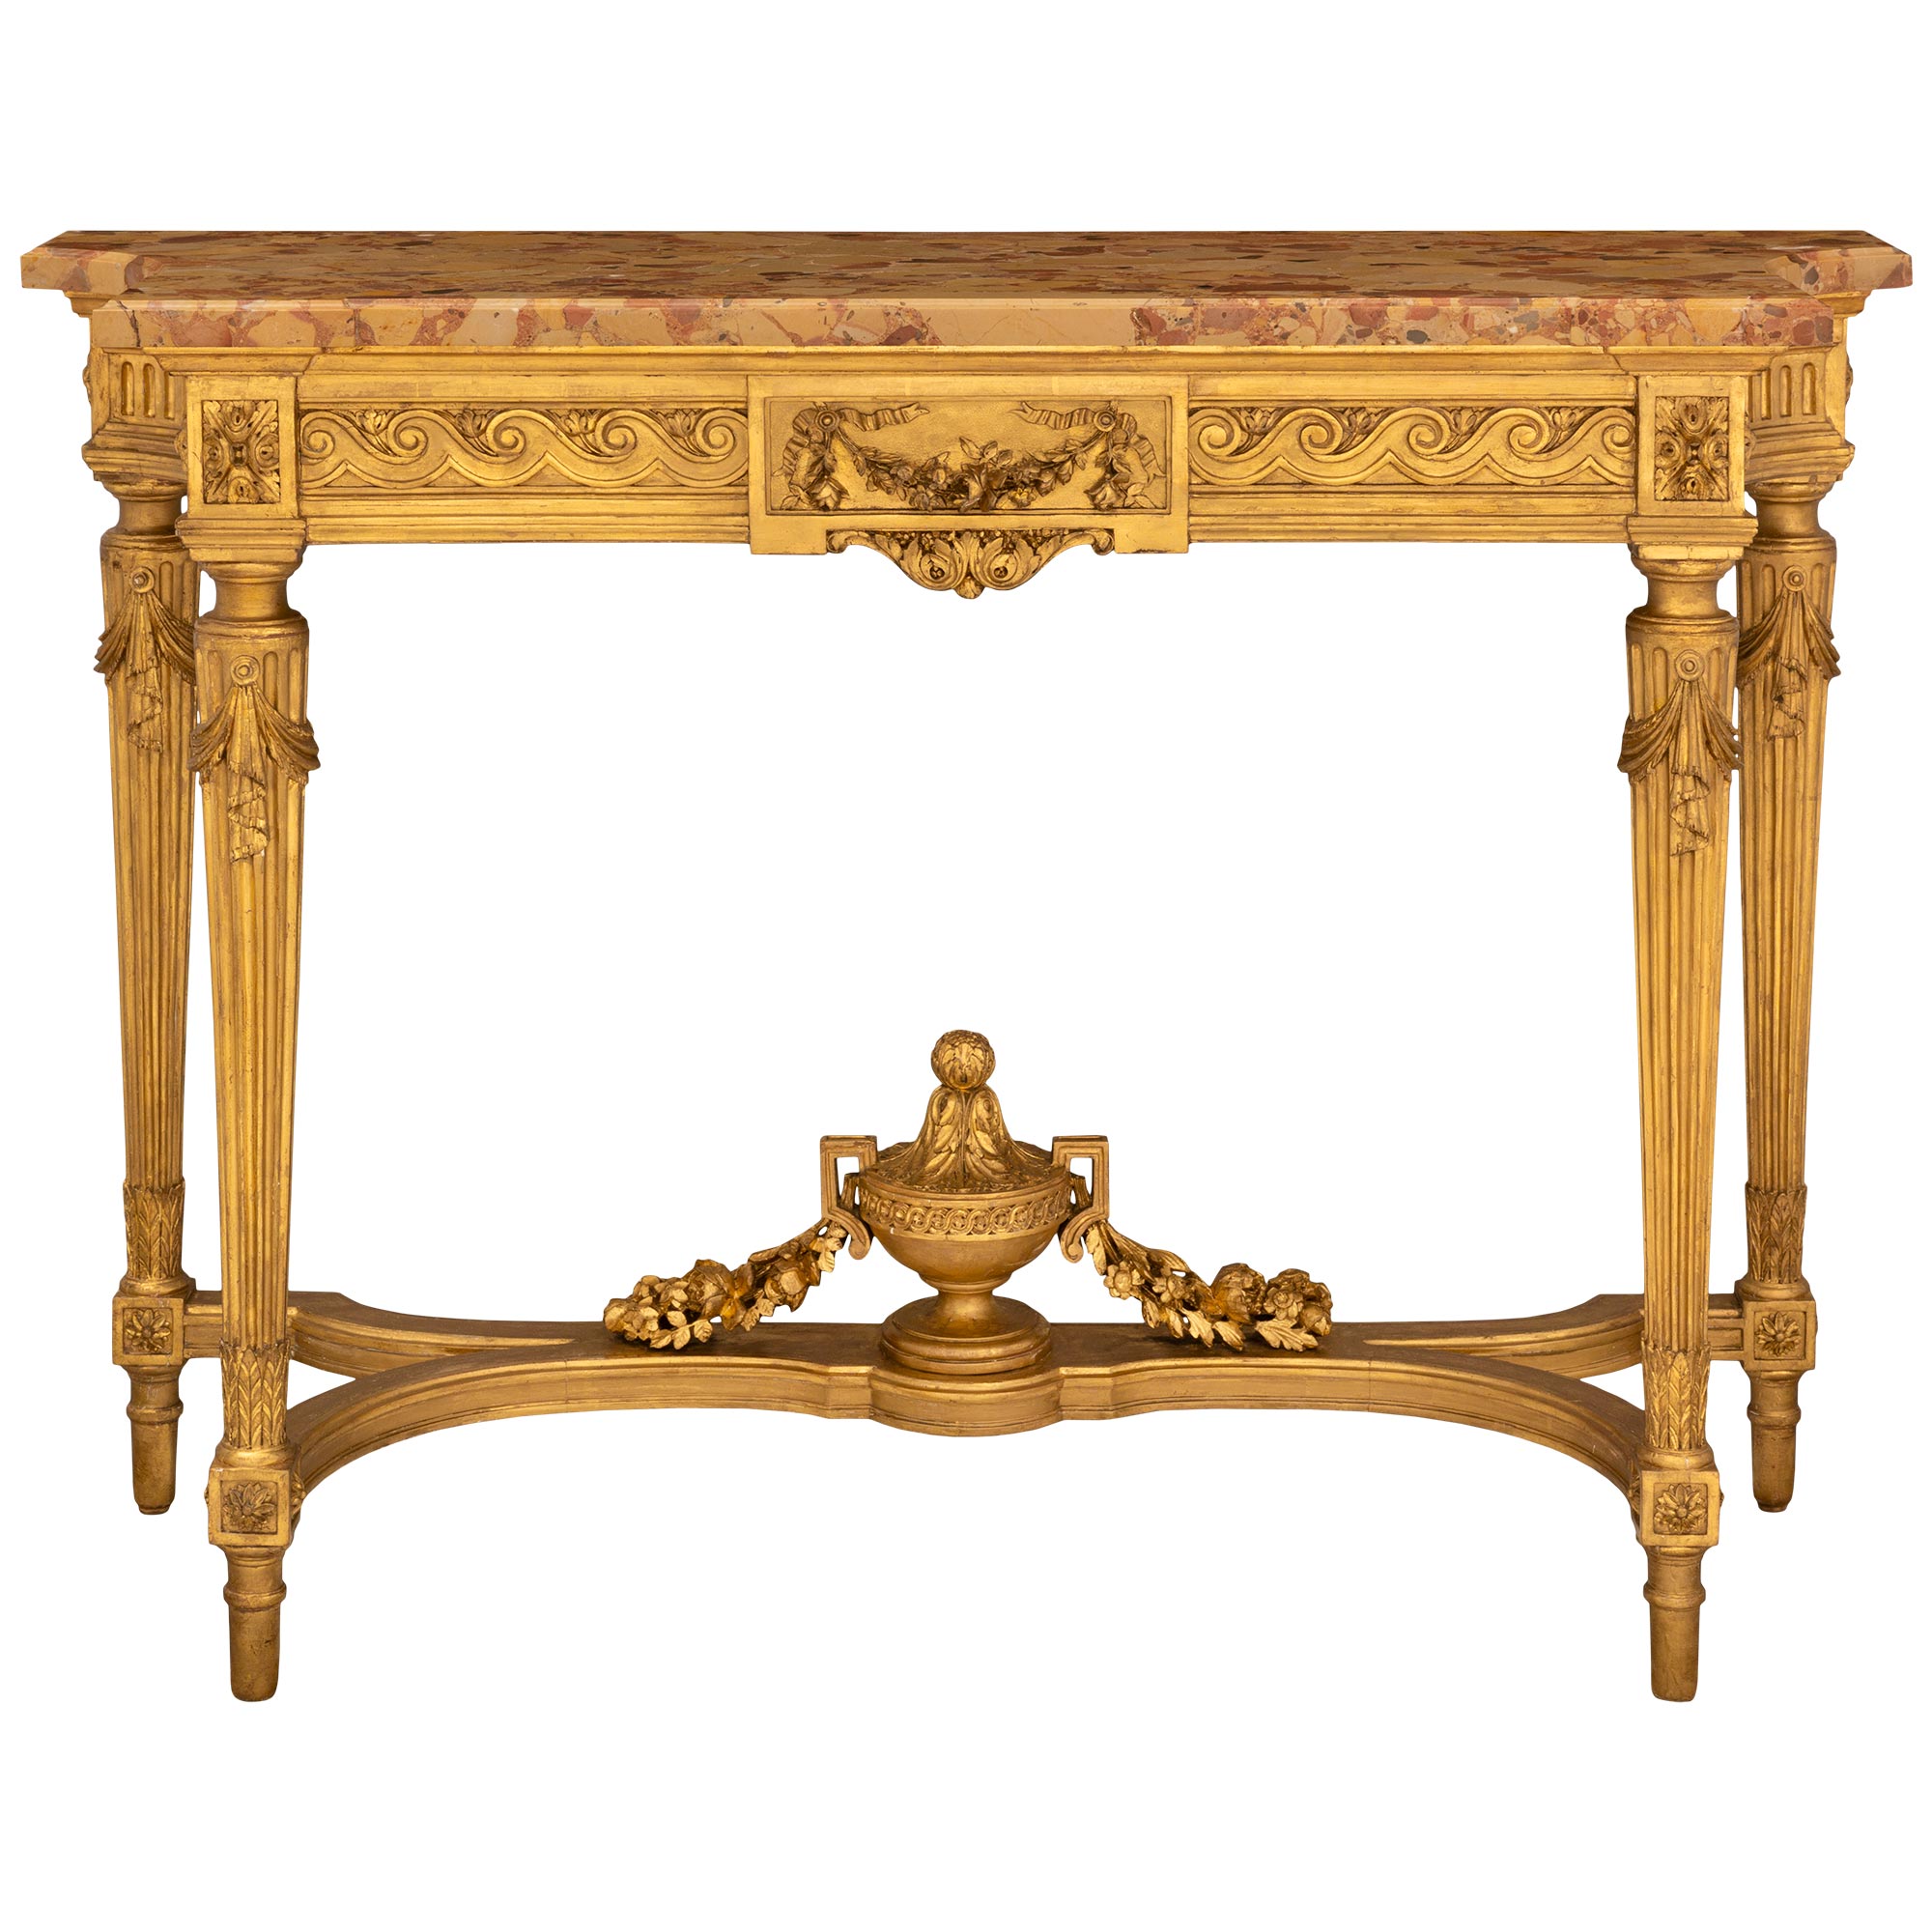 French 19th Century Louis XVI Style Giltwood and Marble Freestanding Console For Sale